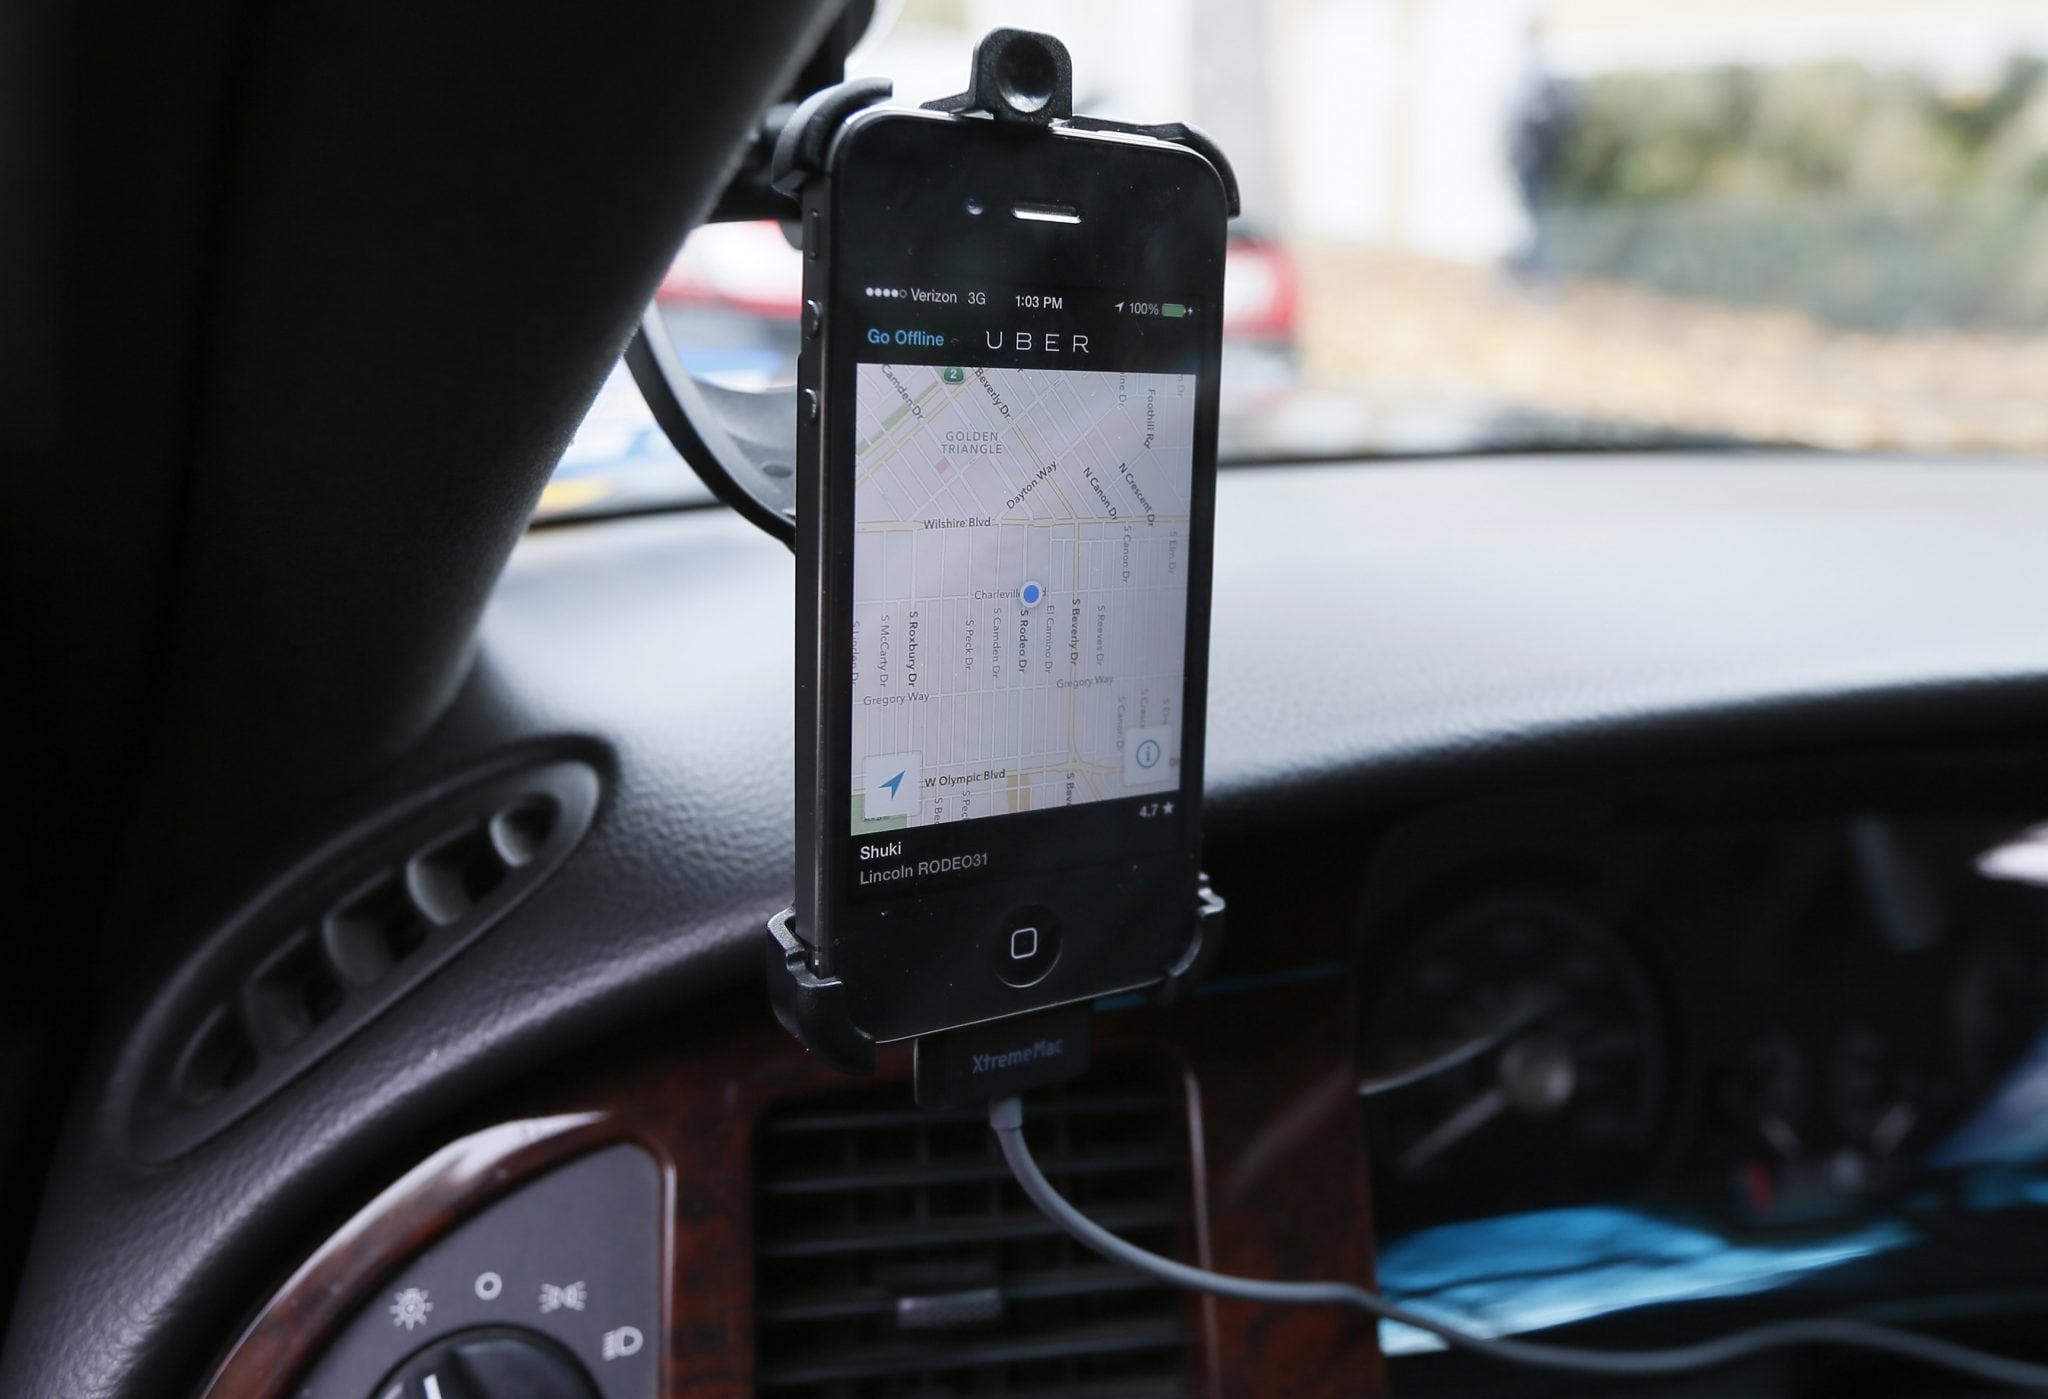 Transportation app Uber is seen on the iPhone of limousine driver in Beverly Hills, California.